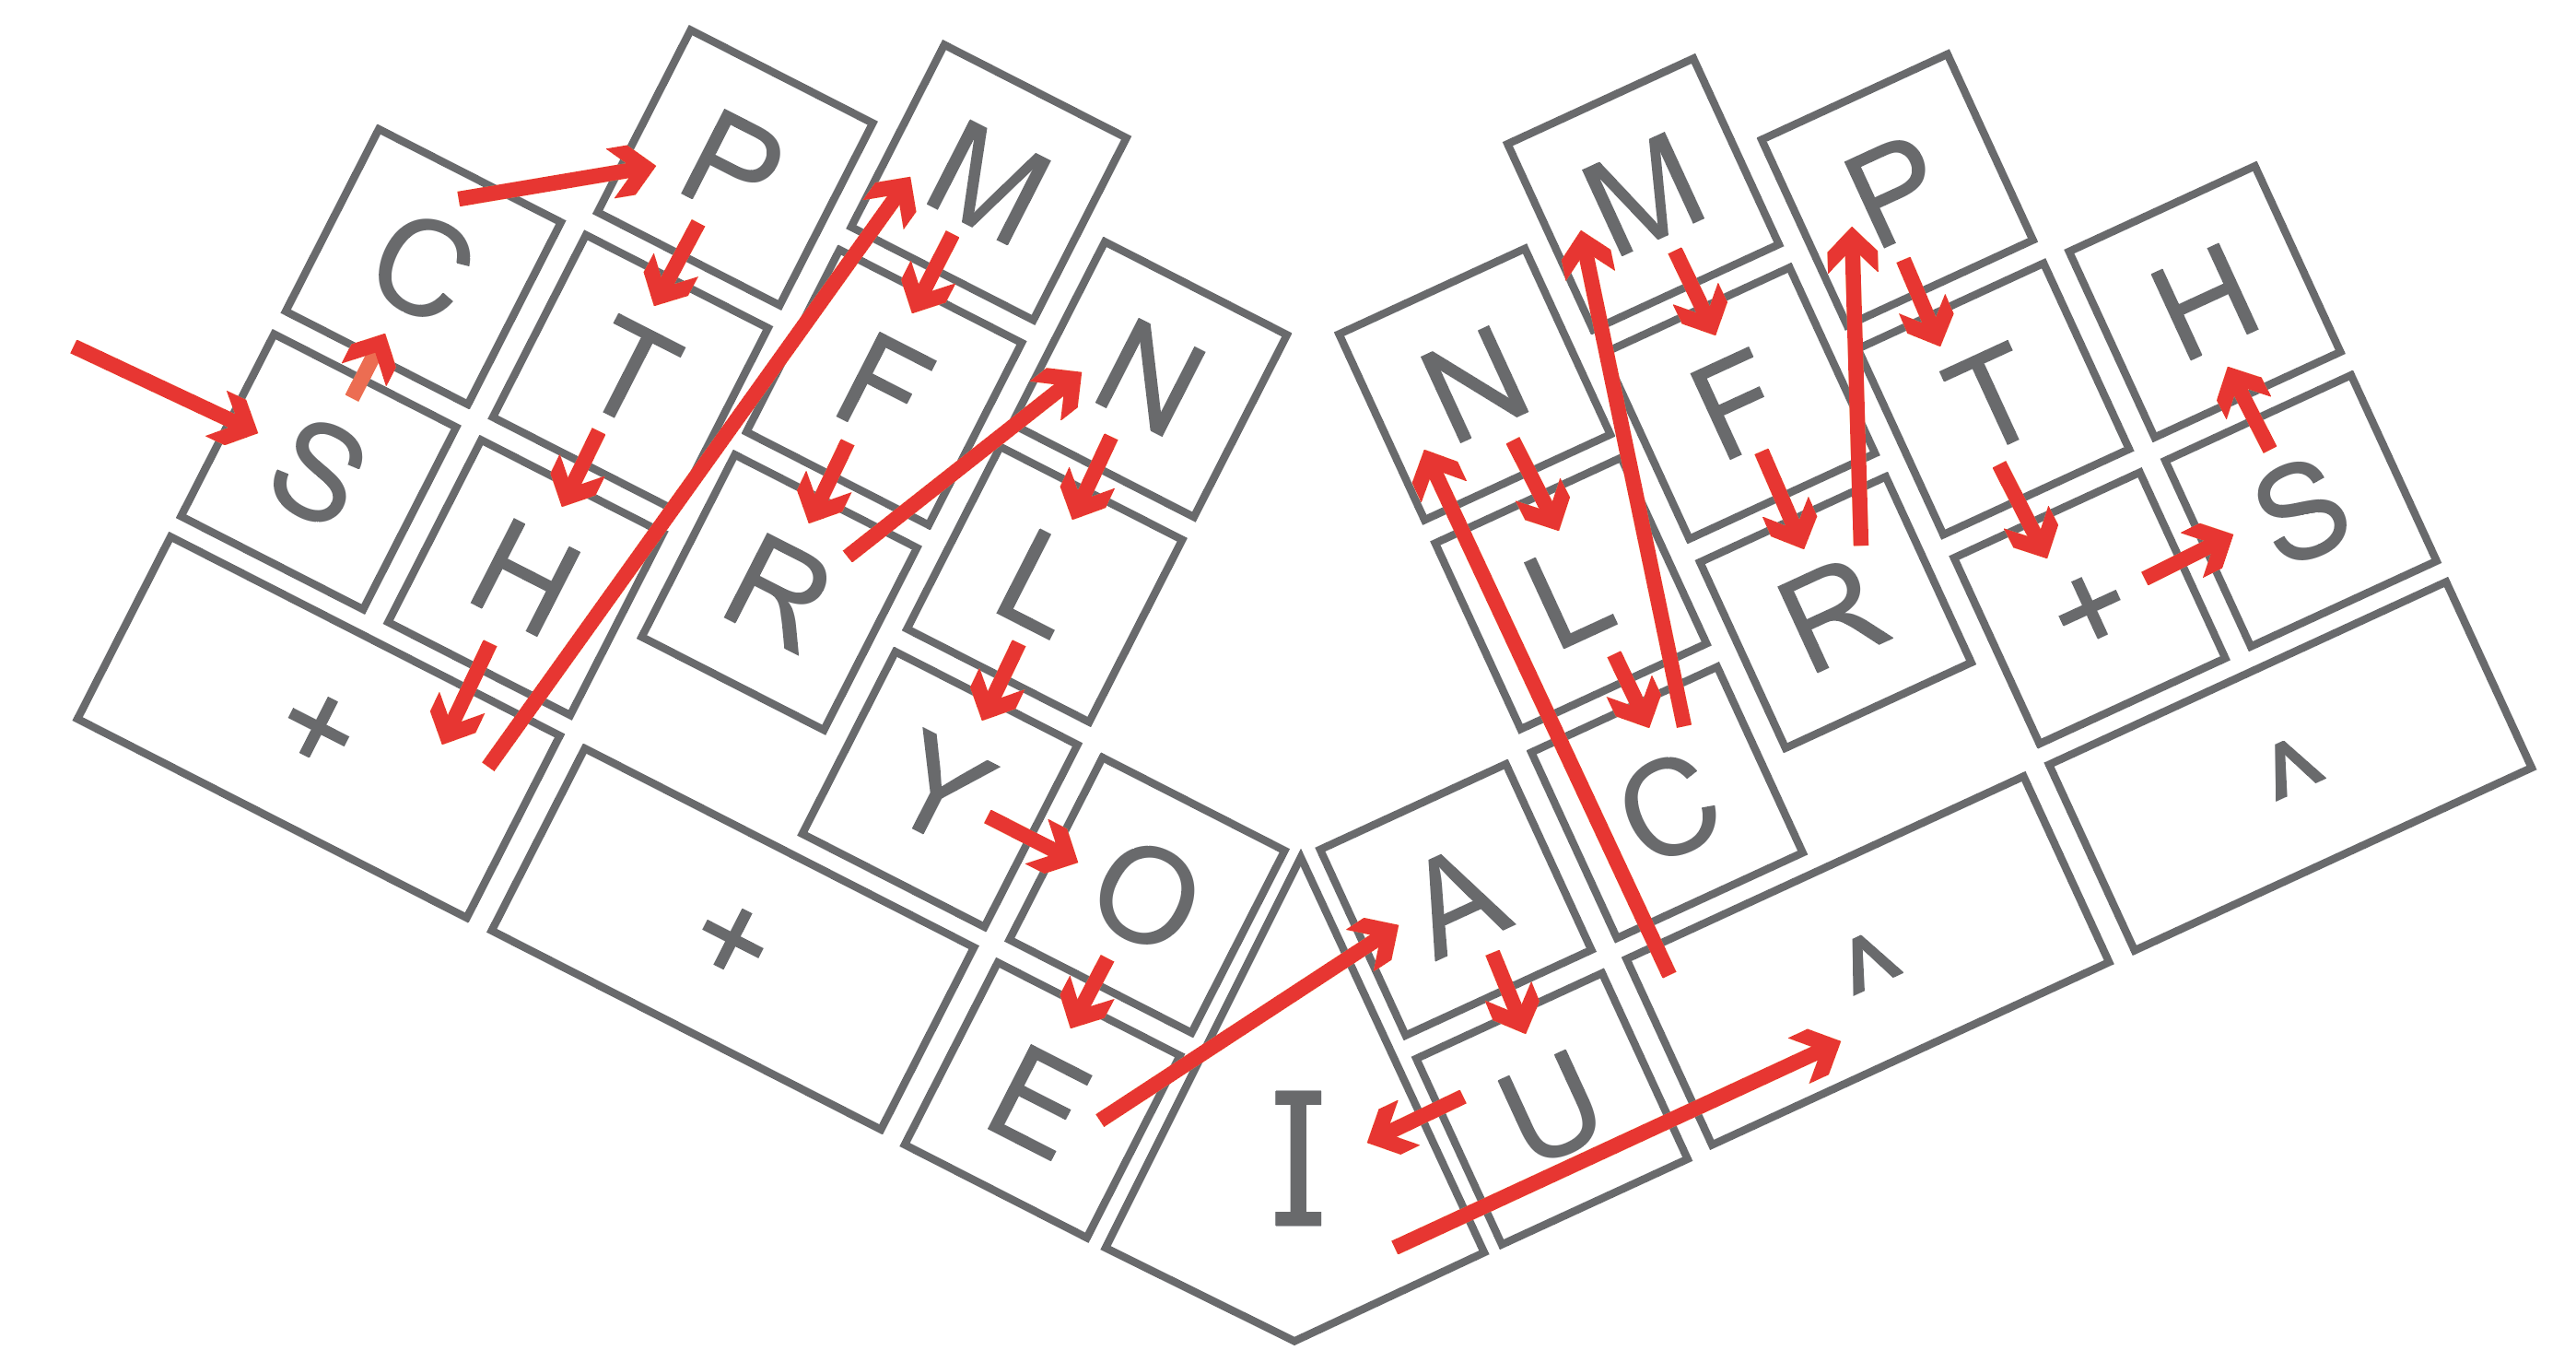 Palantype layout with arrows between the keys depicting the phonetic order